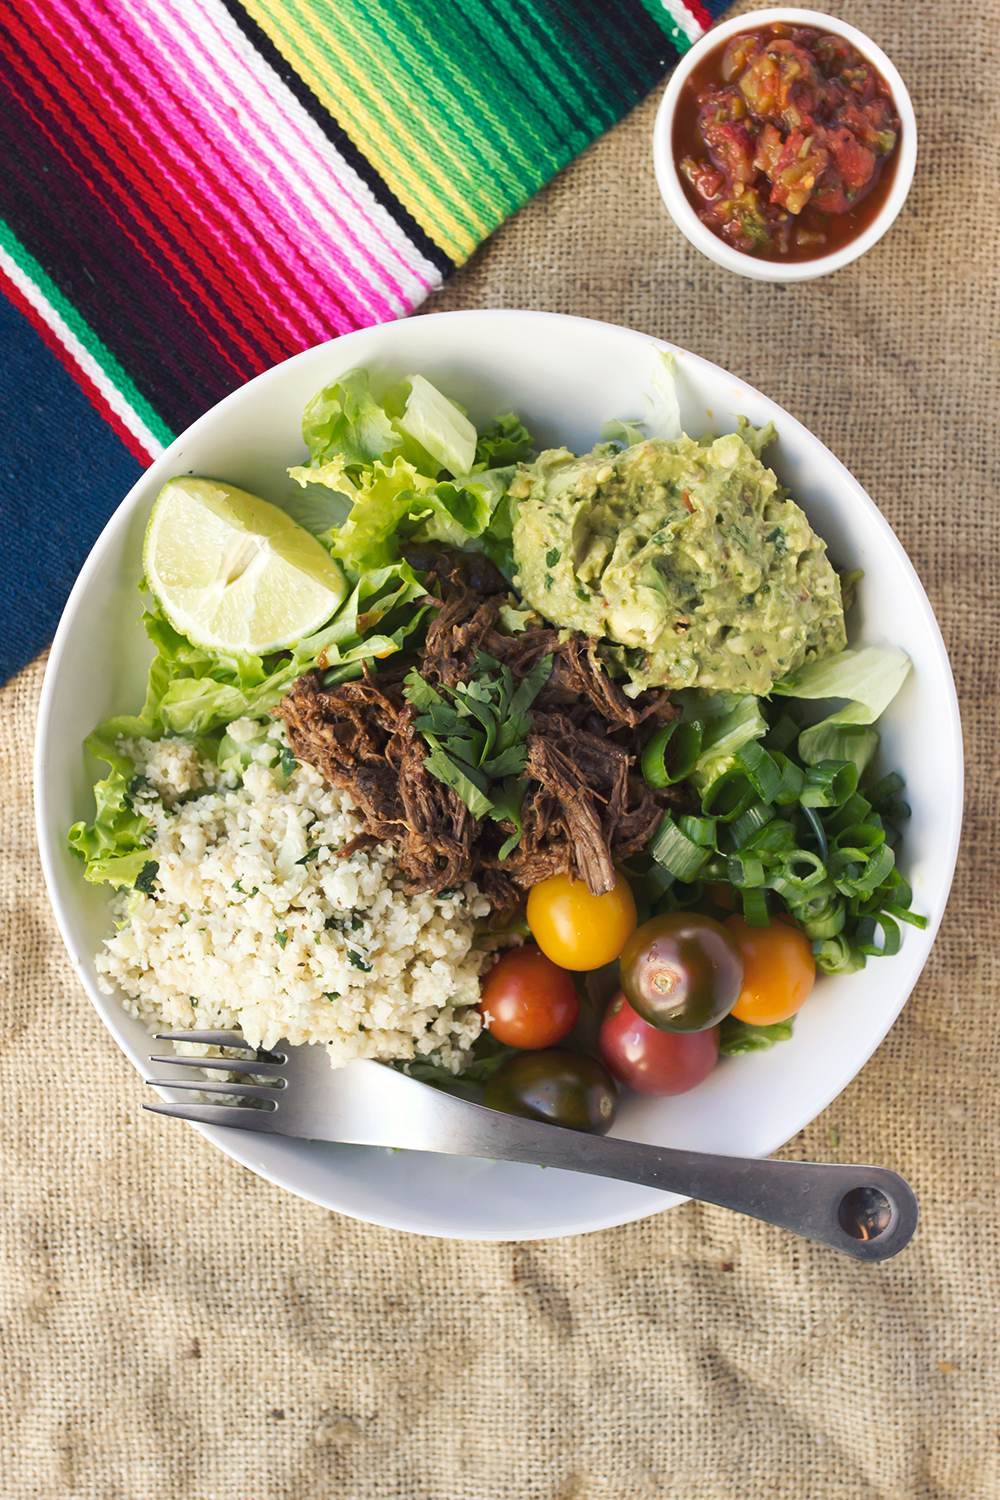 Chipotle Barbacoa Burrito Bowls With Cilantro Lime Cauli Rice Tasty Yummies,How To Cook Chicken On Stove